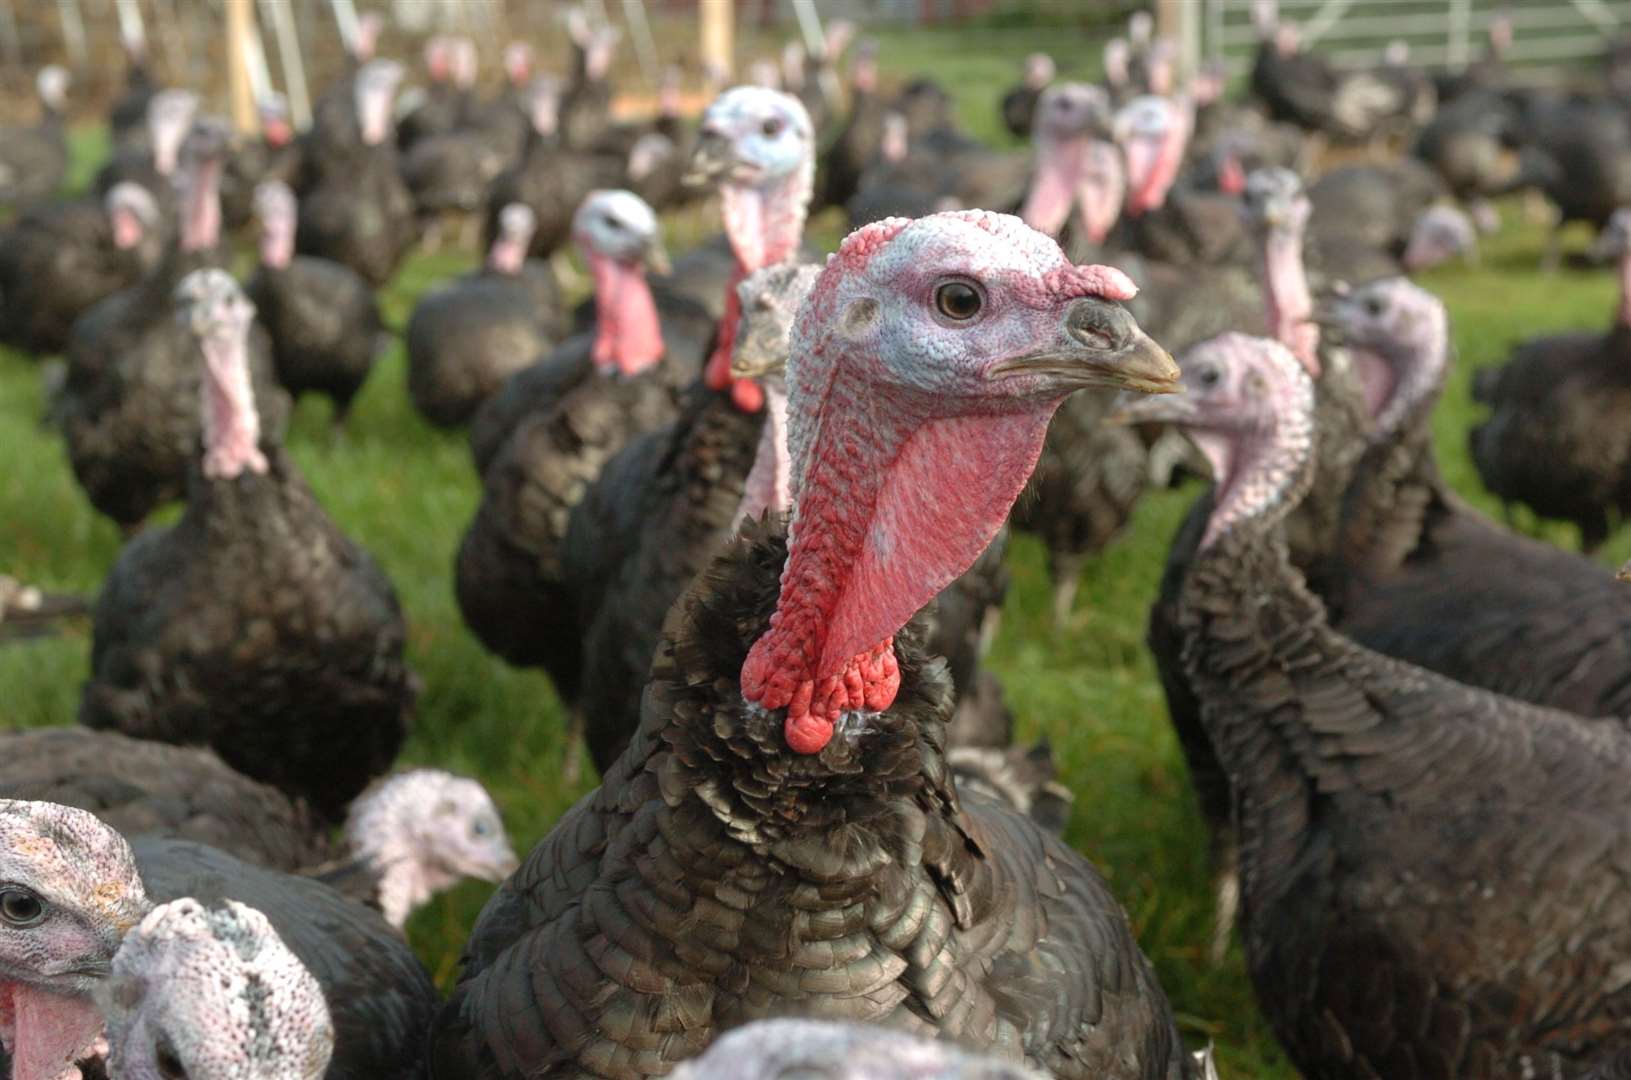 The NFU Poultry Board says avian flu among turkeys could cause 'carnage' in the run up to Christmas